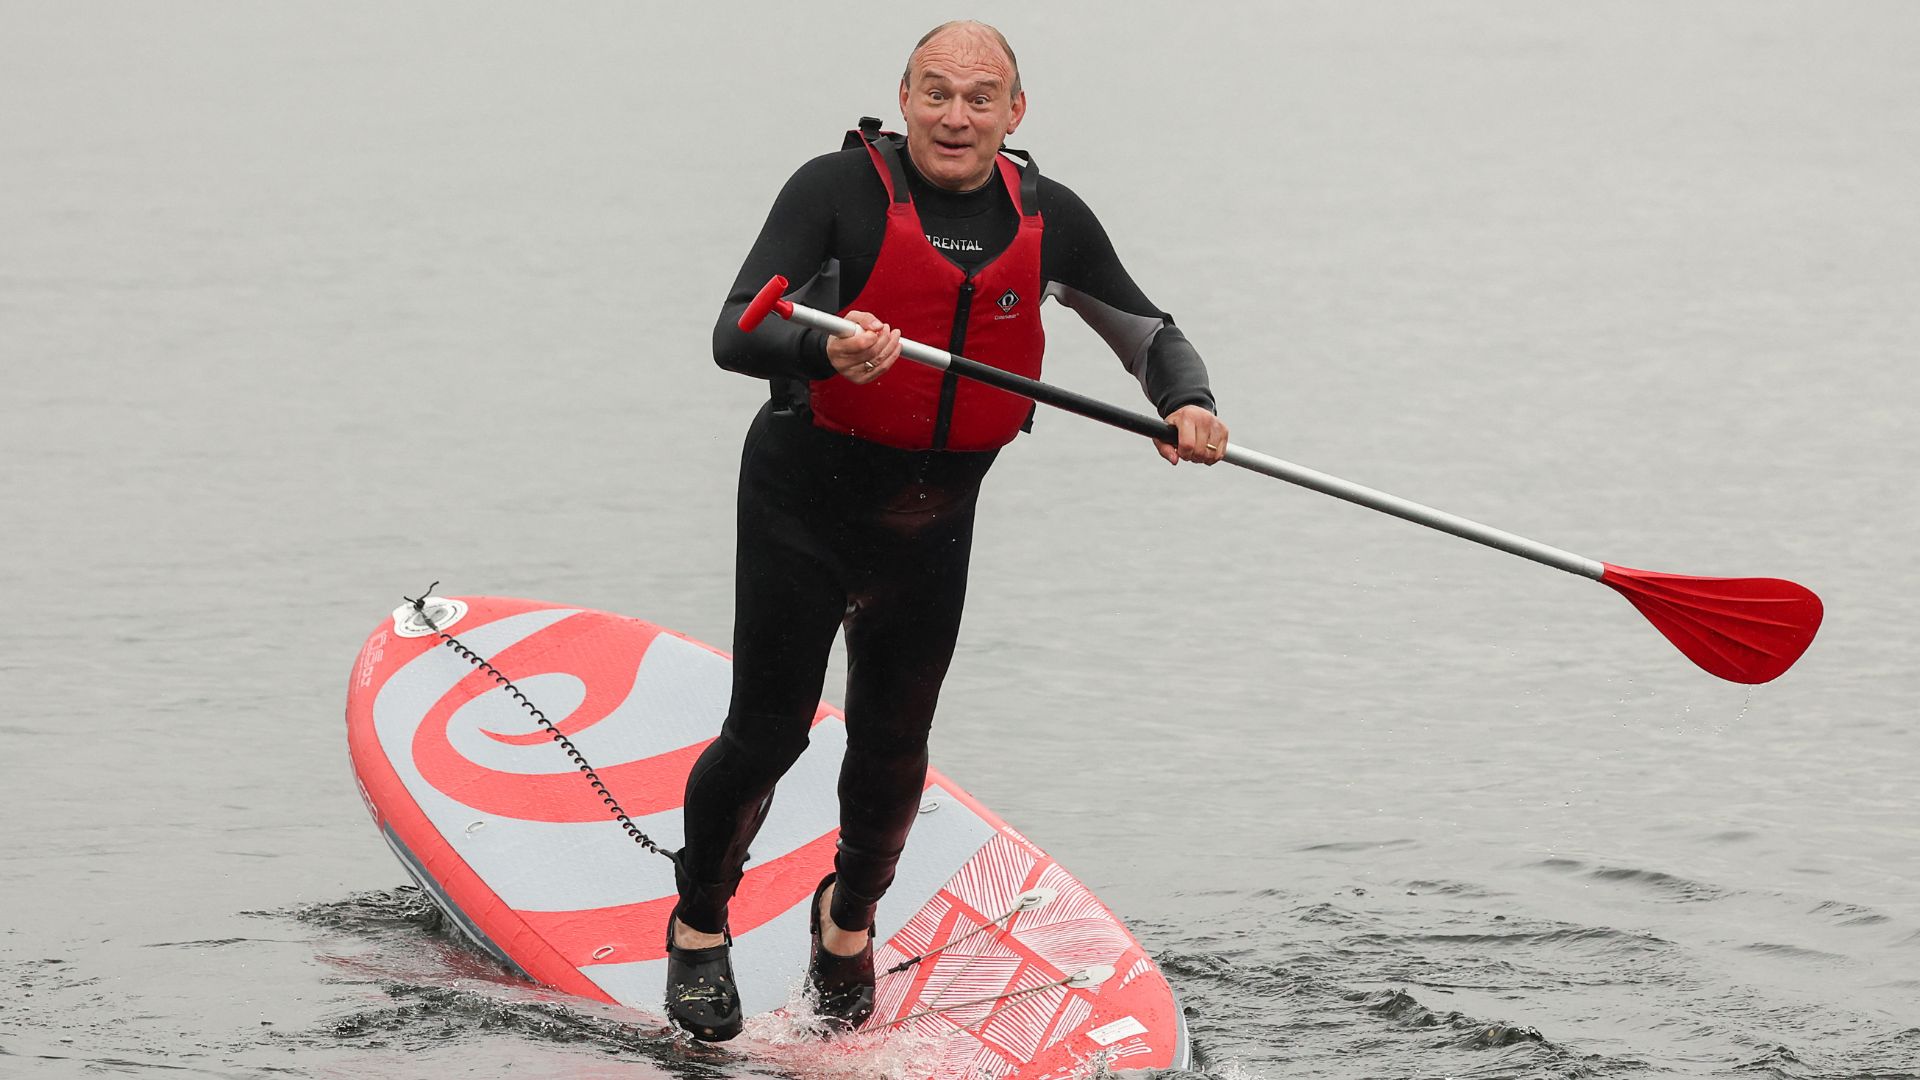 British leader of the Liberal Democrats party Ed Davey falls from a paddle board, at Lake Windermere. /Phil Noble/Reuters
